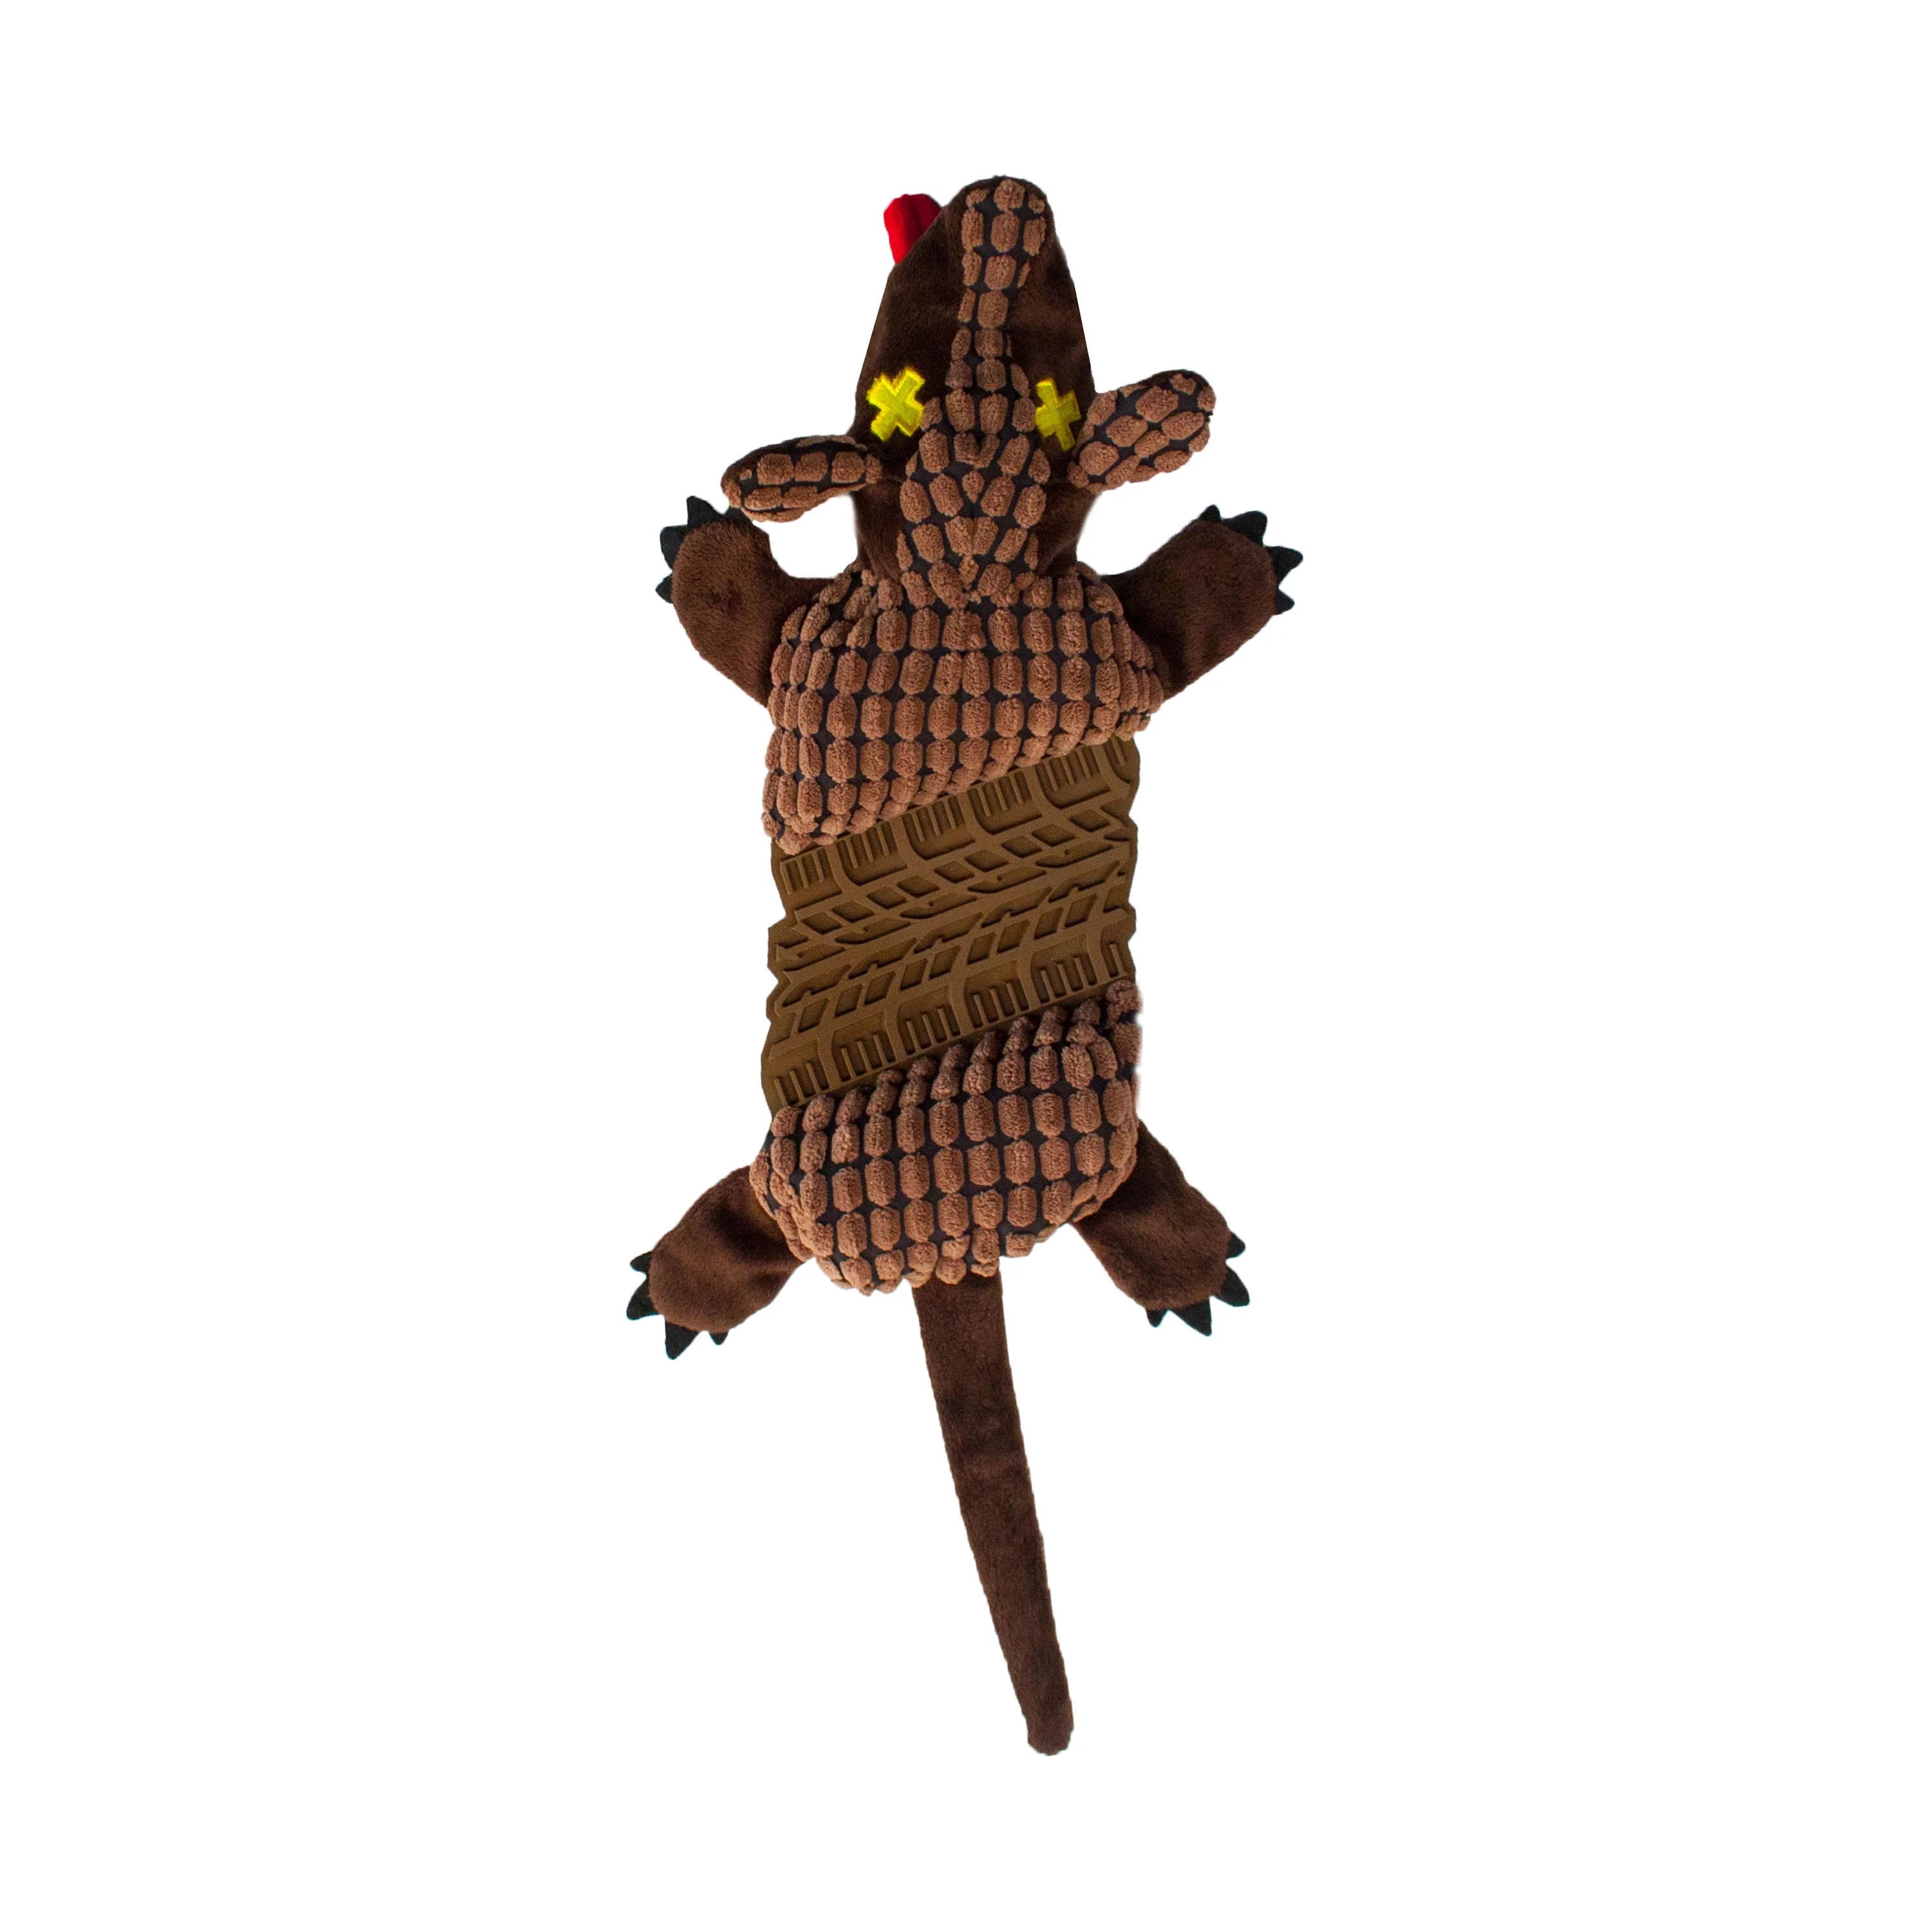 Outward Hound Invincibles Roadkillz Armadillo Dog Toy, Brown, Large